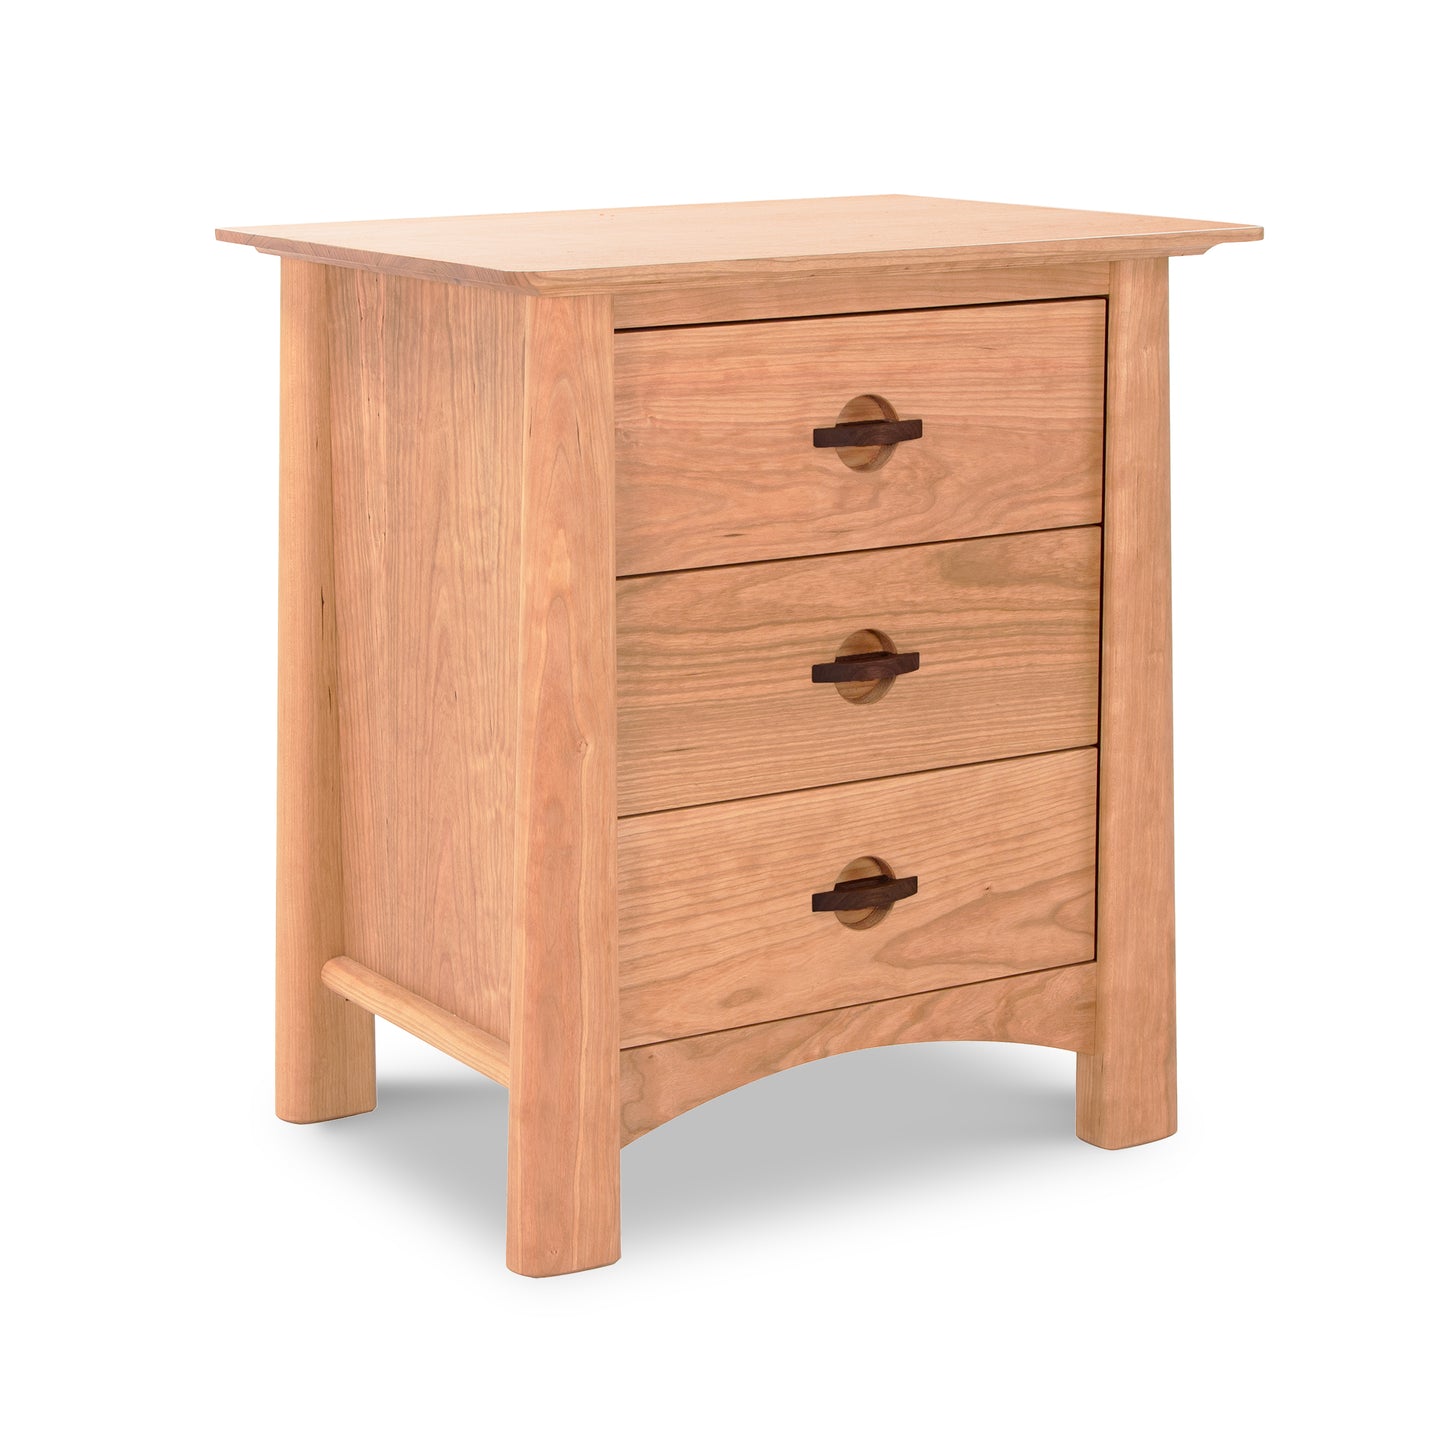 Cherry Moon 3-Drawer Nightstand crafted from sustainably harvested cherry wood, natural finish. Featuring three drawers with circular handles, rectangular beveled top, and four straight legs. Complements Maple Corner Woodworks solid wood furniture. Perfect American made nightstand for bedroom sets, Shaker or Mid Century Modern decor.